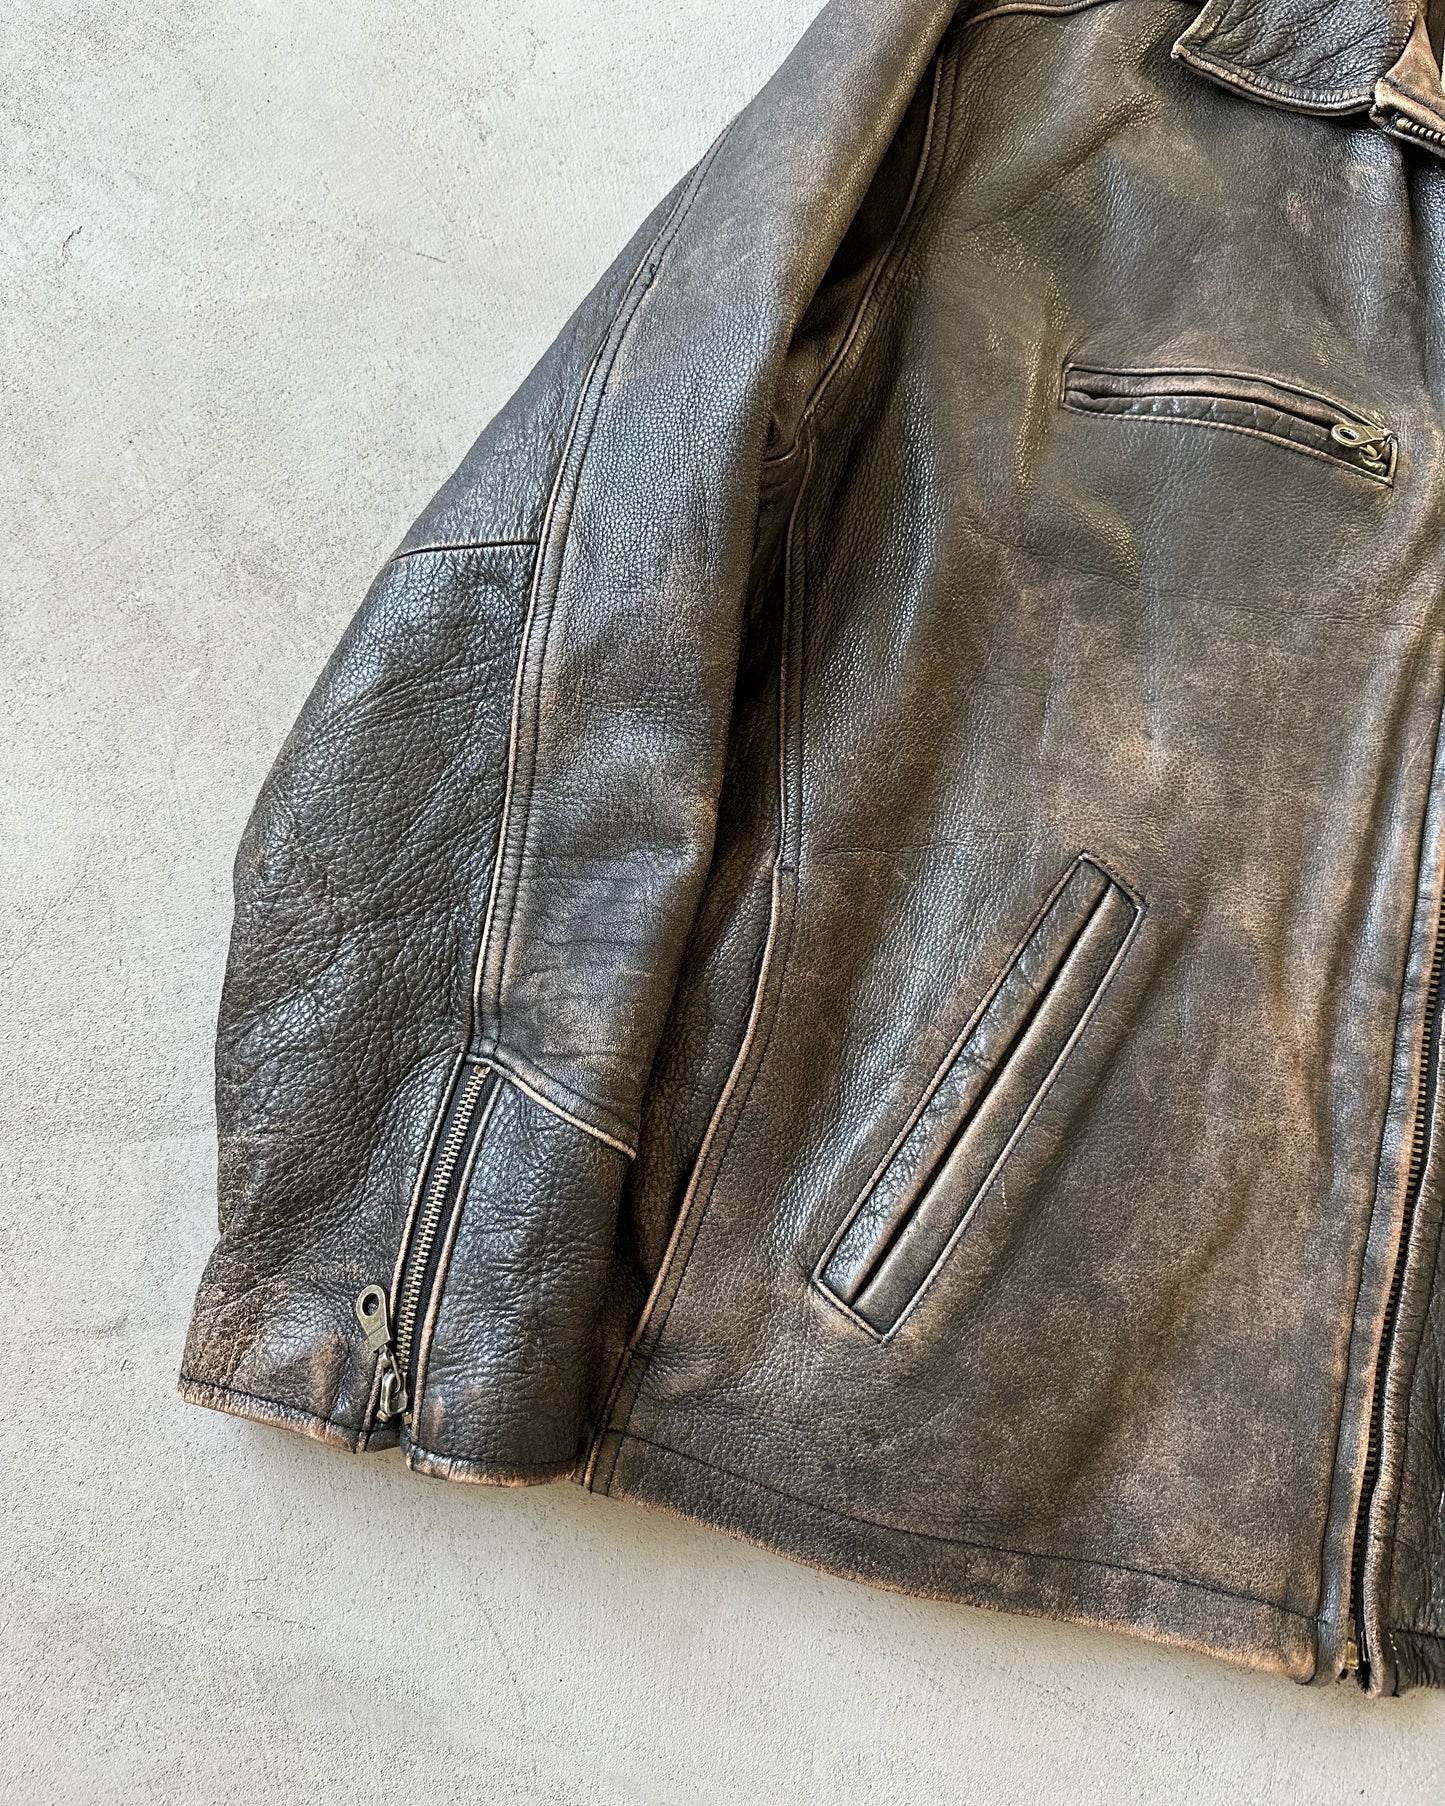 1990s - Faded Black Leather Jacket - XL